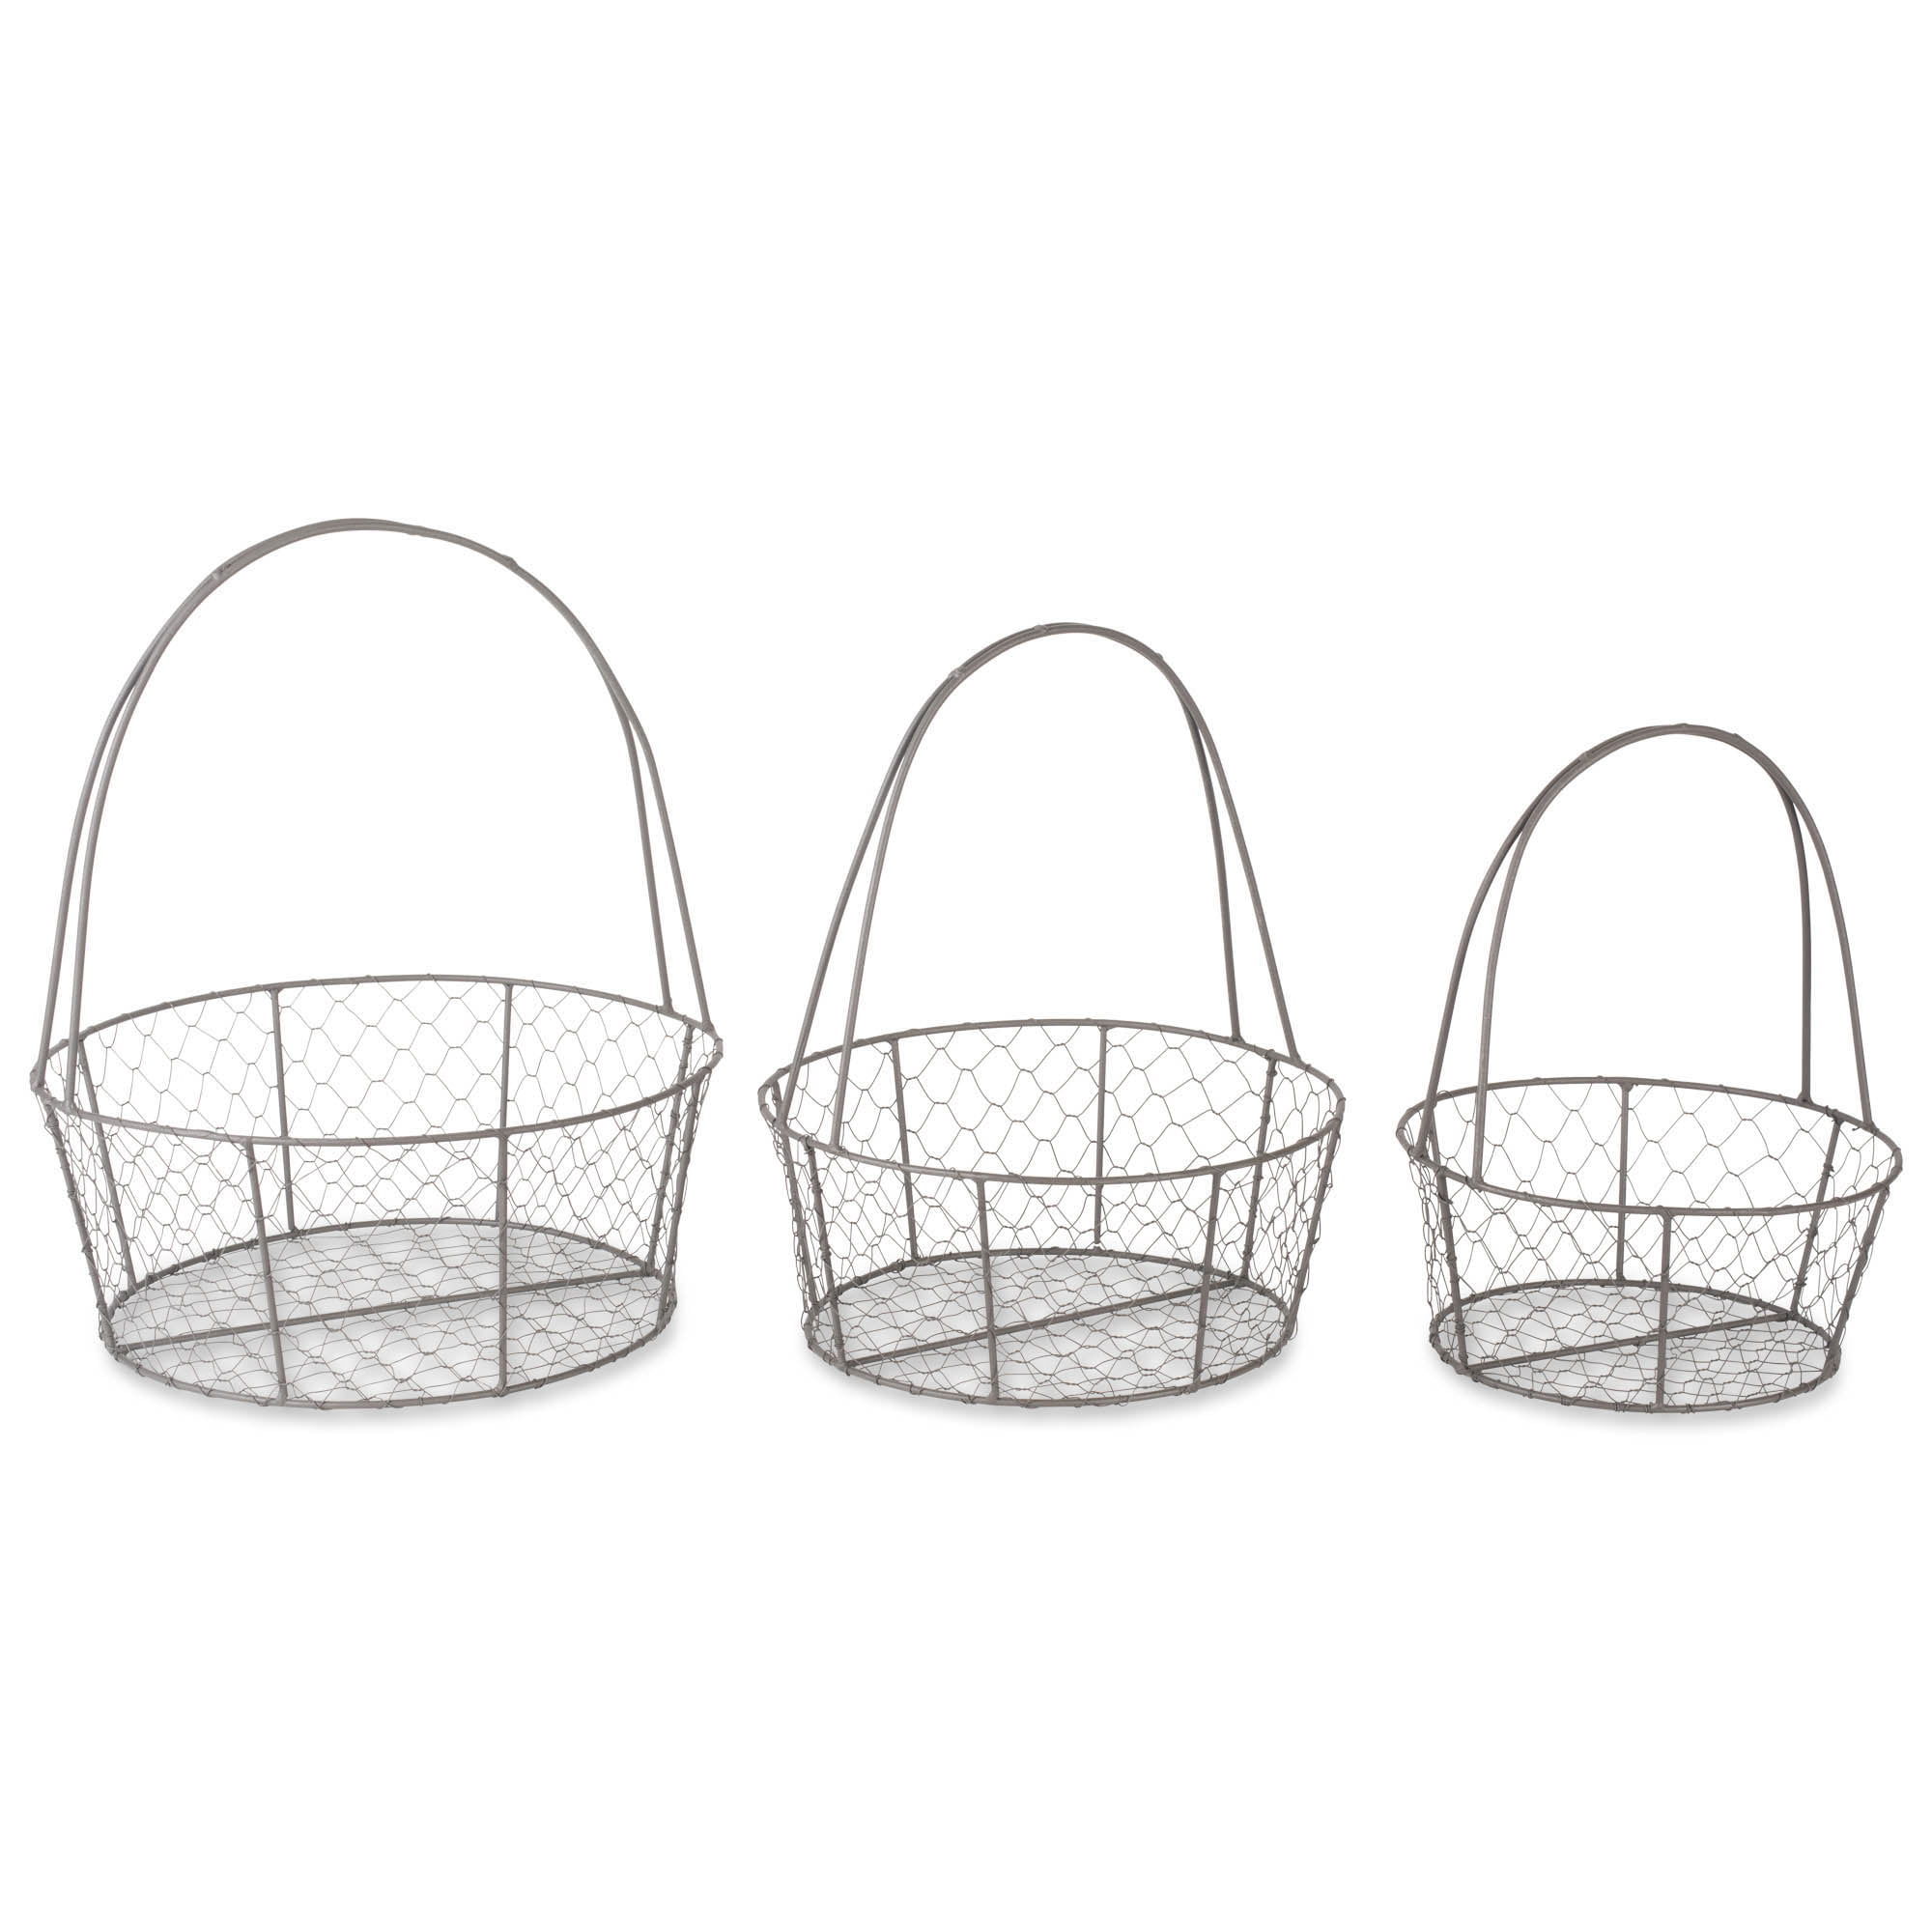 Set of 3 Chicken Wire Nesting Basket Set by Handcrafted 4 Home 